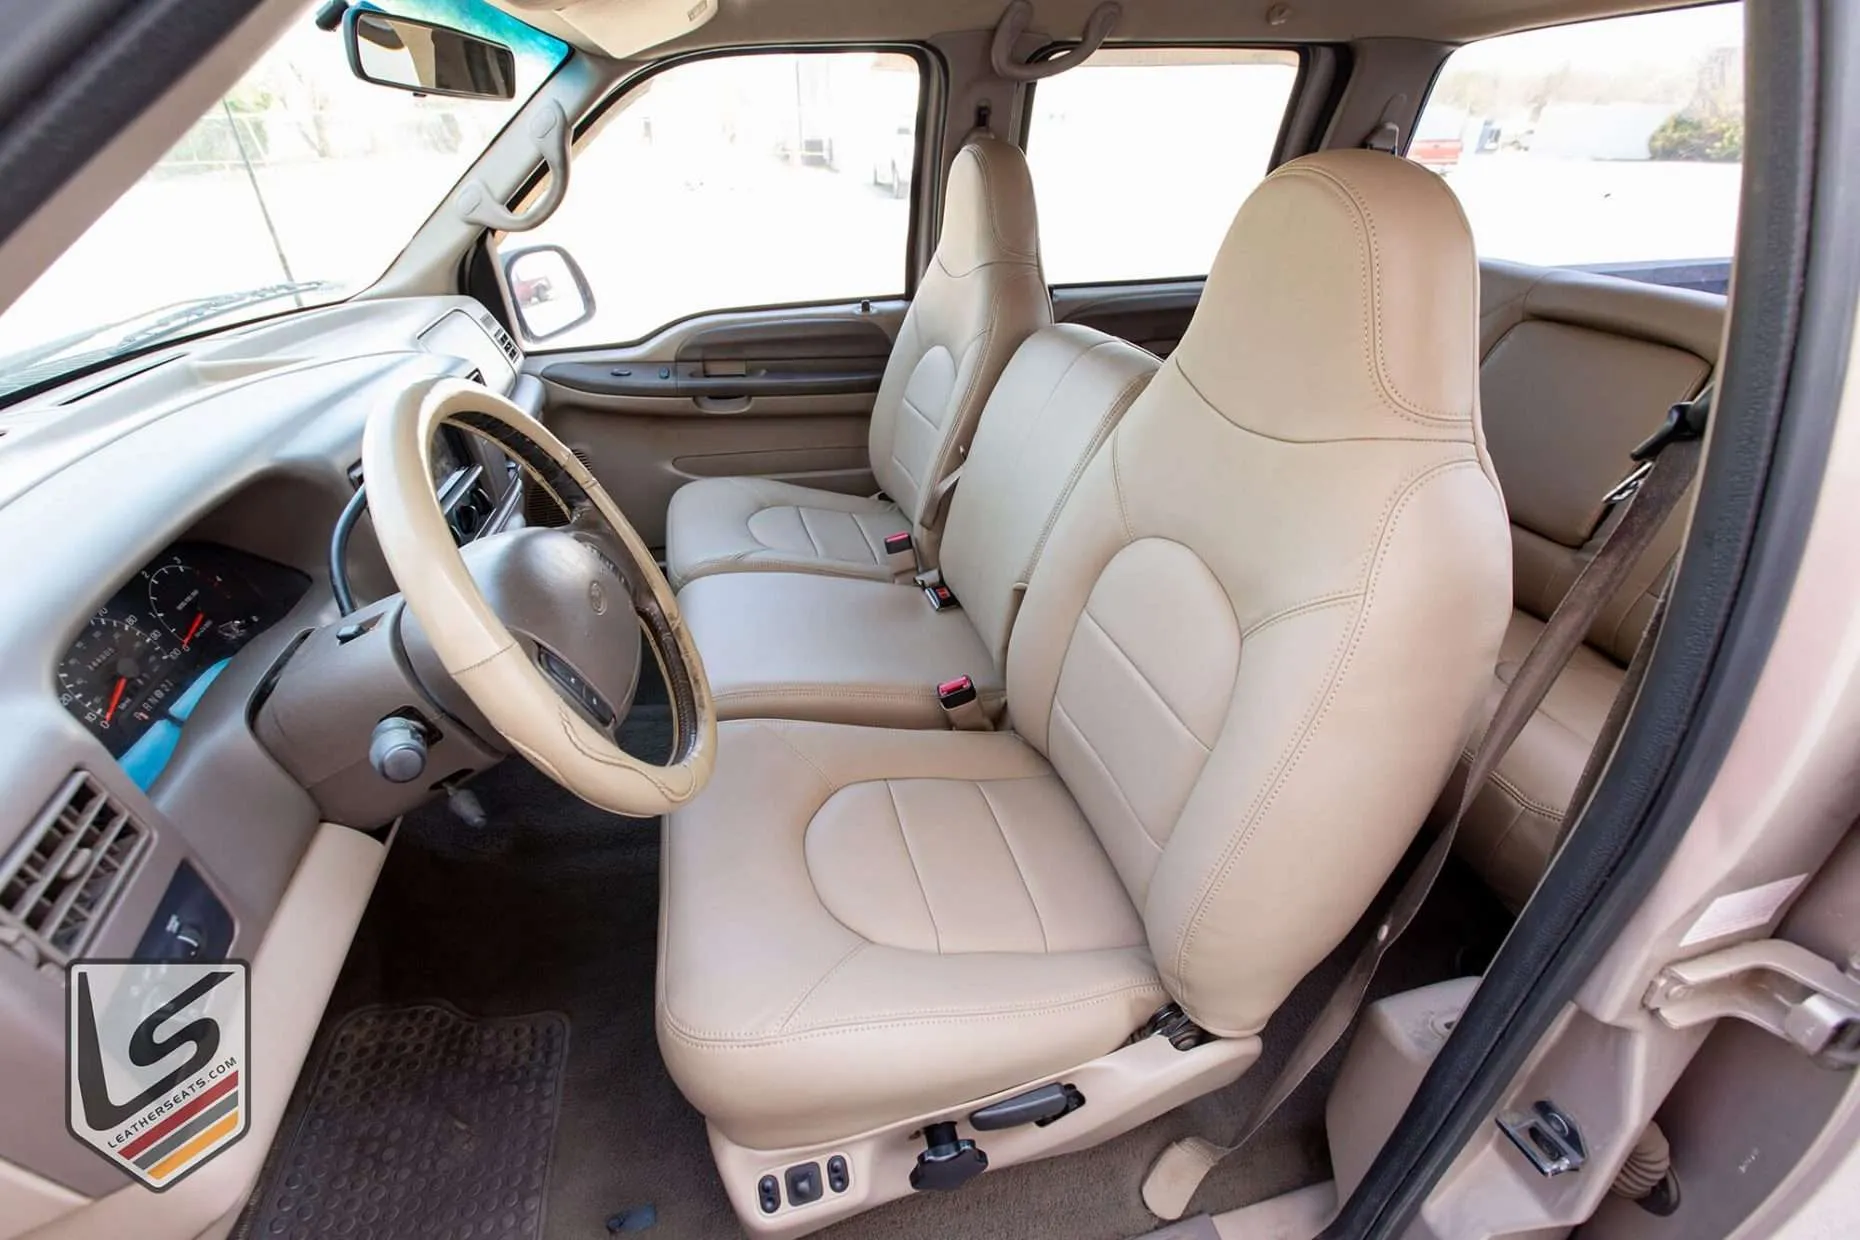 Ford F-250 with Nutmeg leather interior - front jump seat raised position